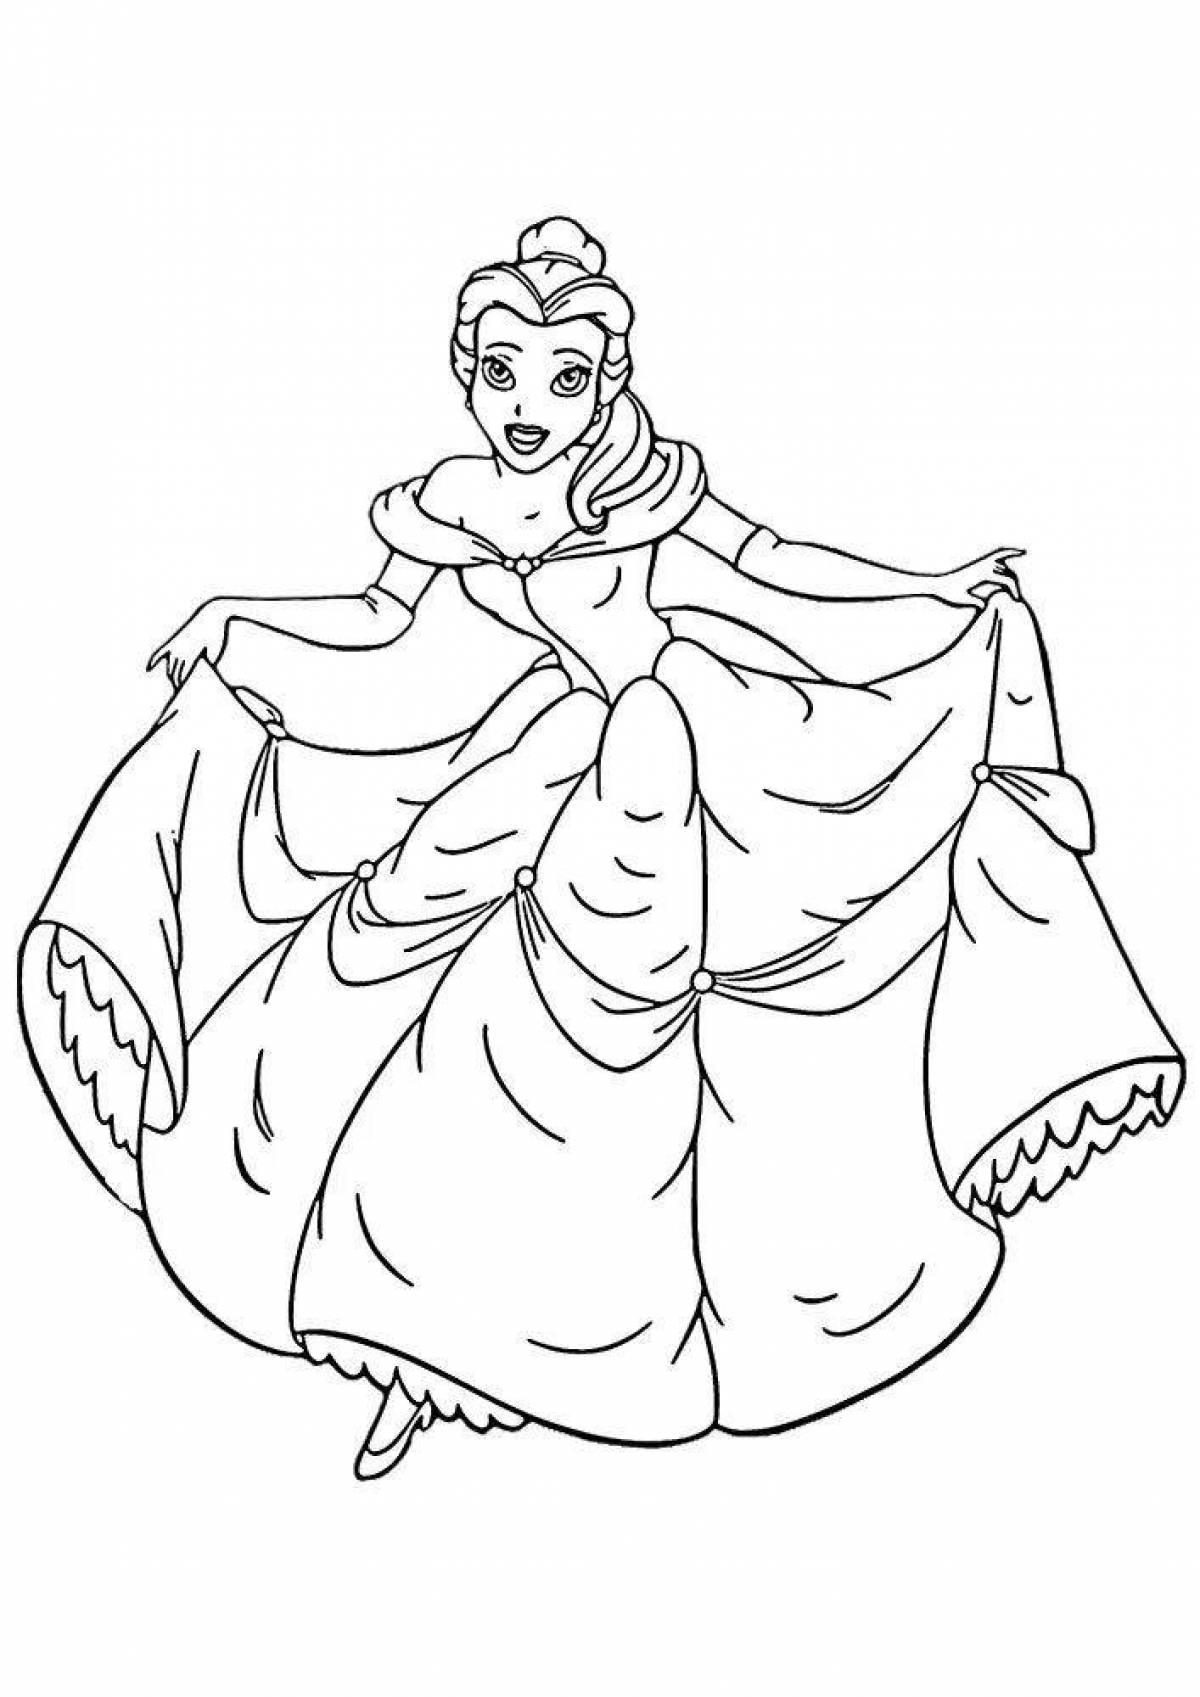 Awesome princess belle coloring page